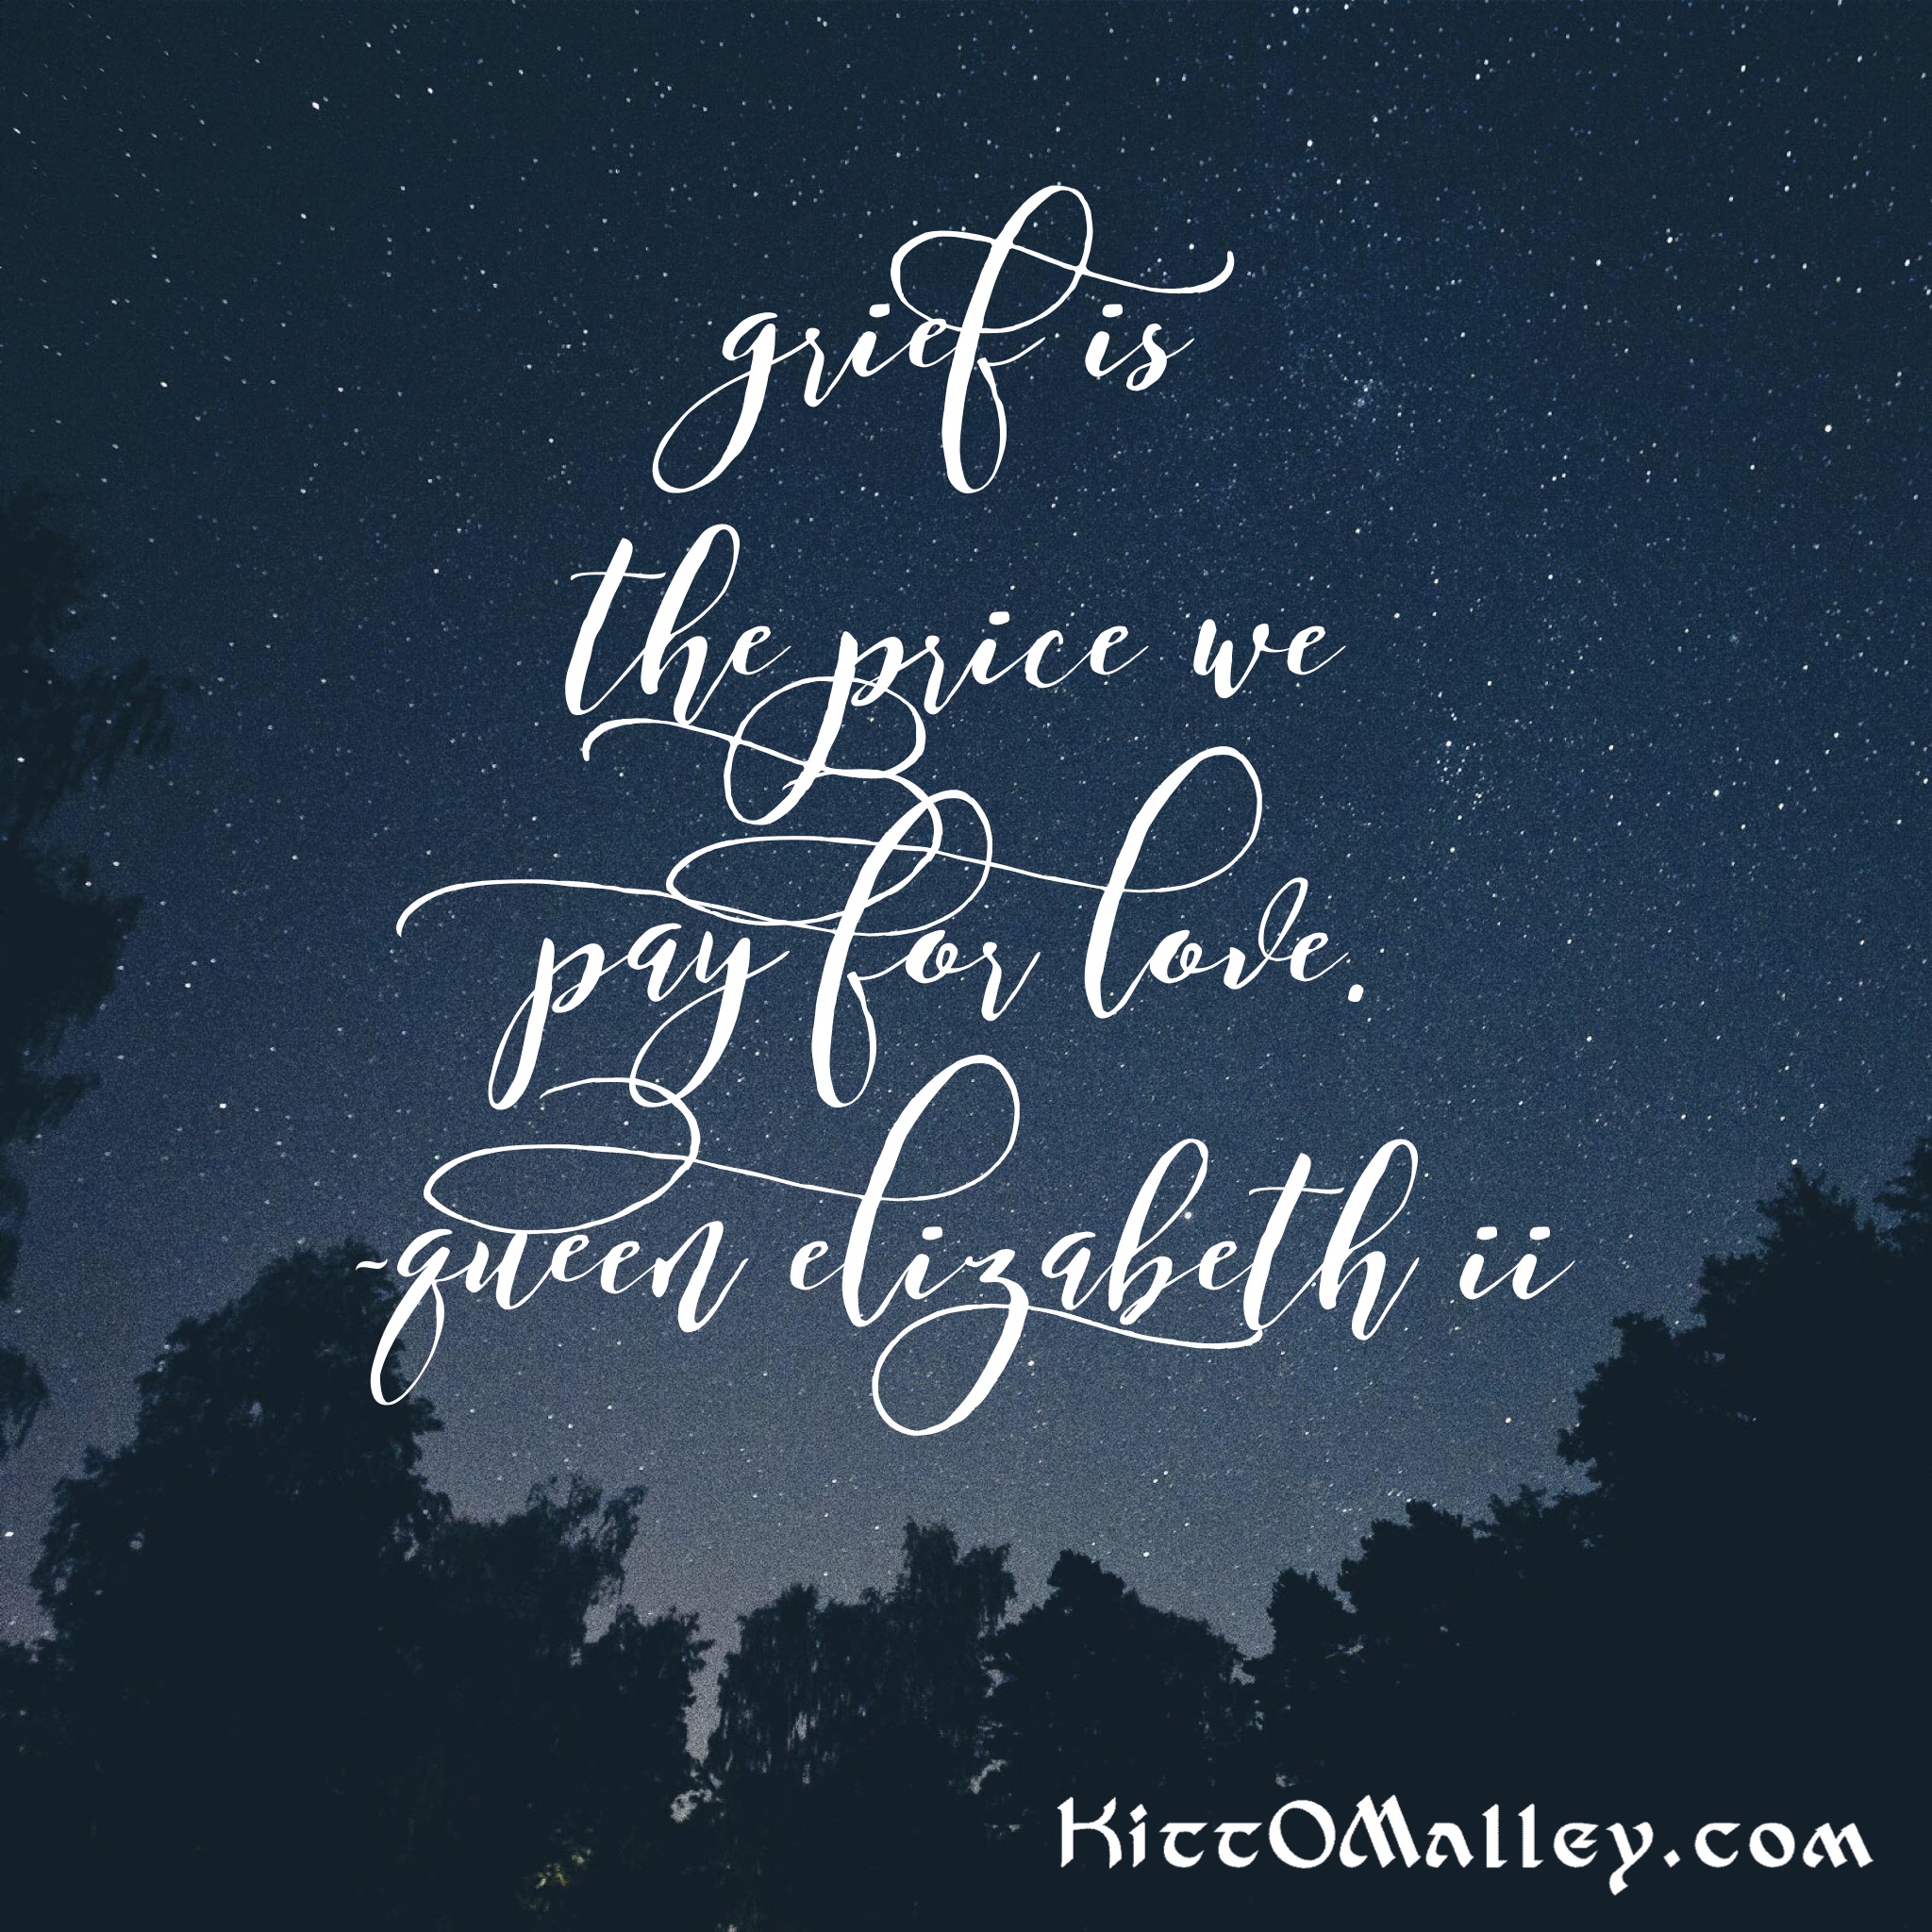 Grief is the price we pay for love. —Queen Elizabeth II. Meme by KittO’Malley.com